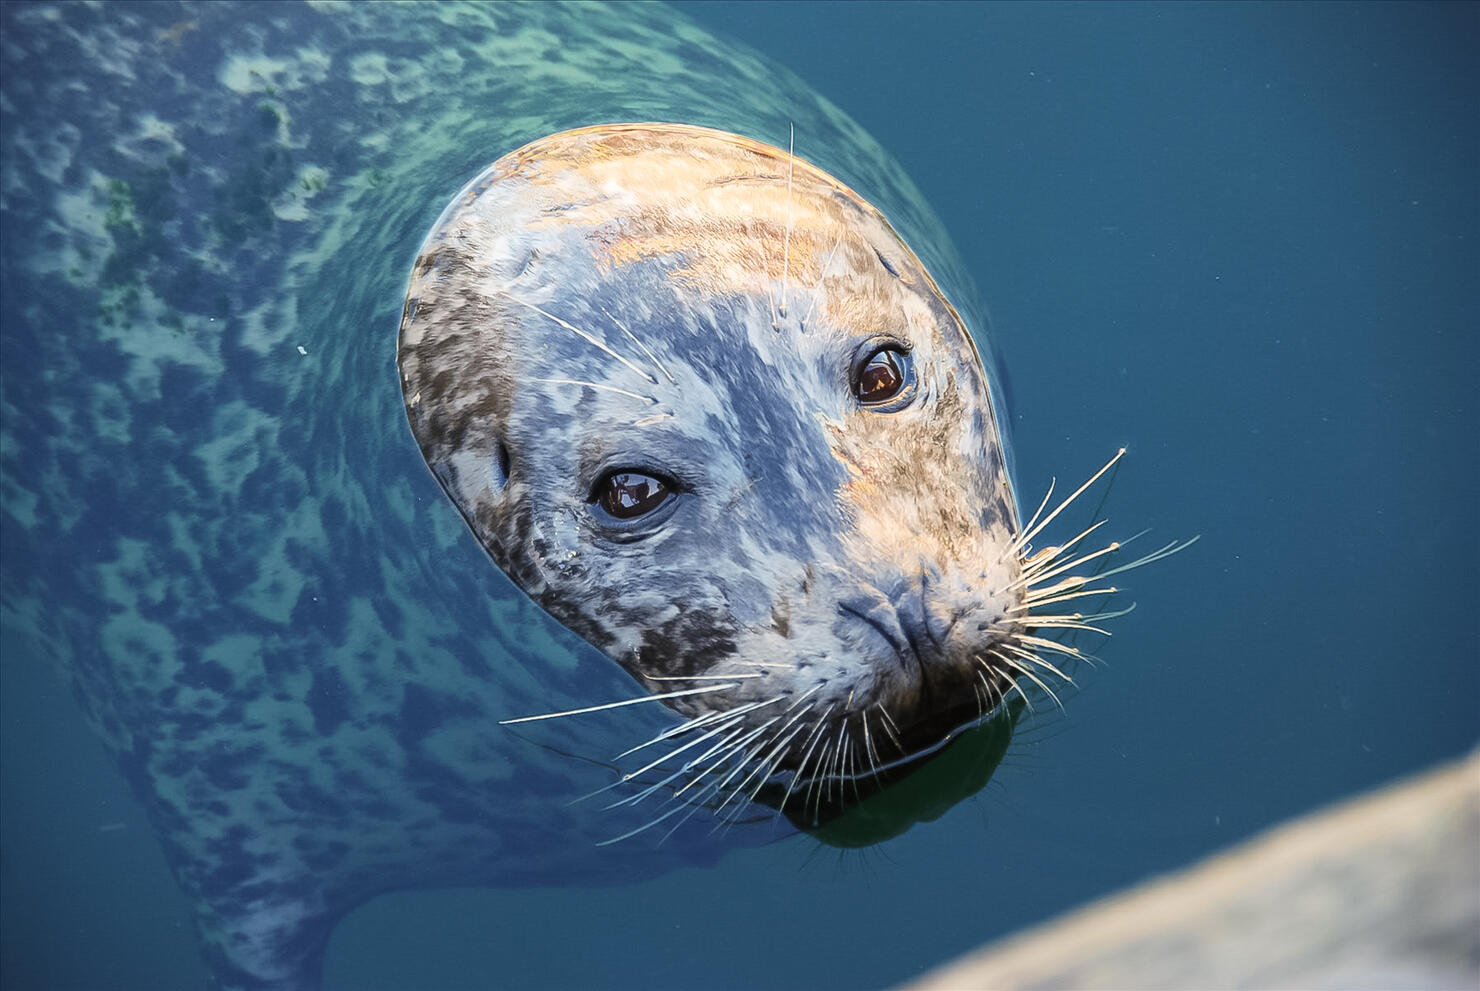 Protrait of a common harbor seal in the water looking directly at the camera.